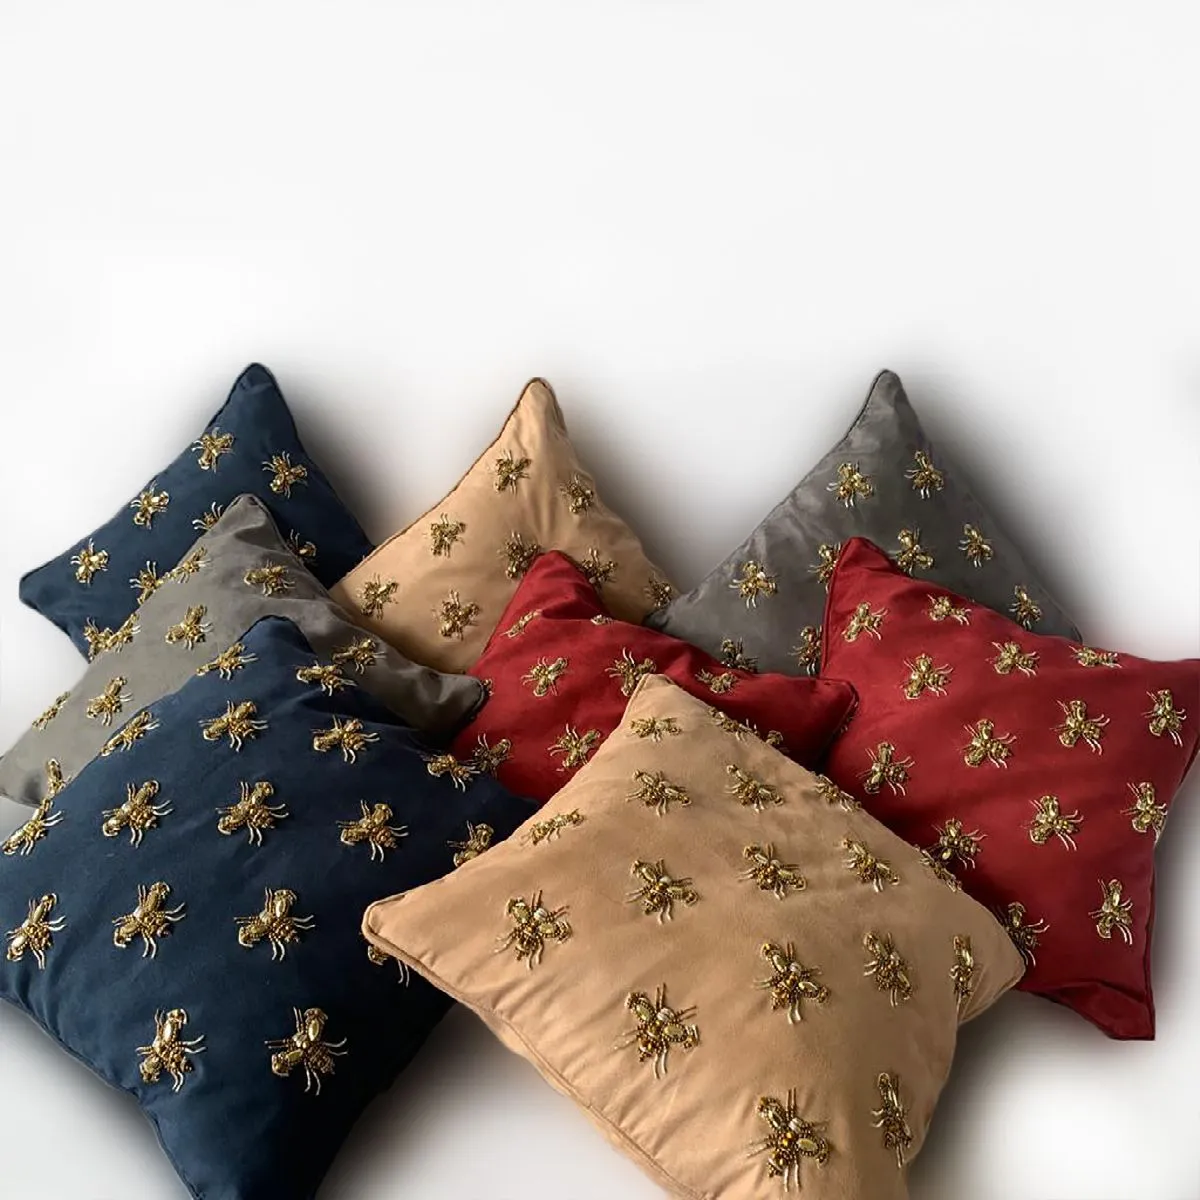 https://www.pushplinen.com/media/mf_webp/jpg/media/catalog/product/cache/cf31784aff4118f6ff0a874947d70aaa/i/n/insect-embroidery-pillow-cover3_2.webp